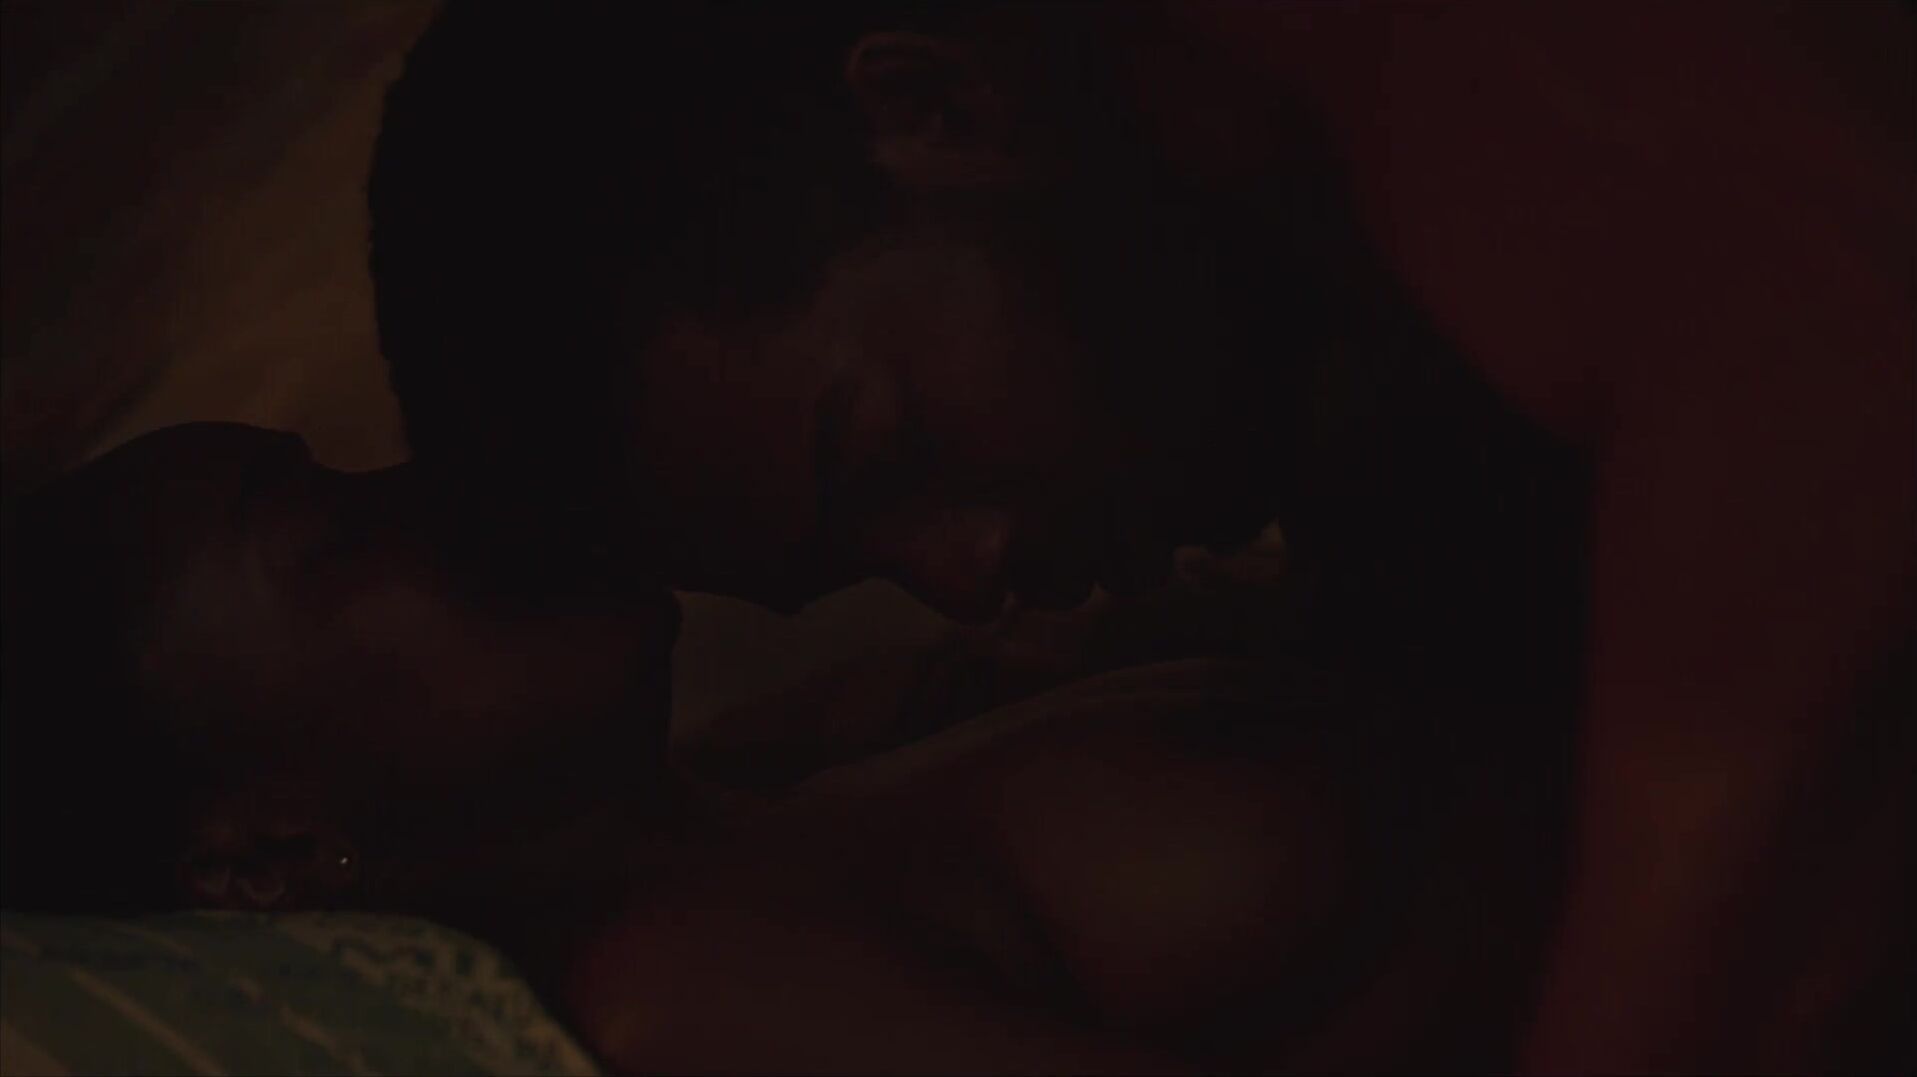 Smooth Black man gives pleasure to KiKi Layne in drama movie If Beale Street Could Talk (2018) Sex Tape